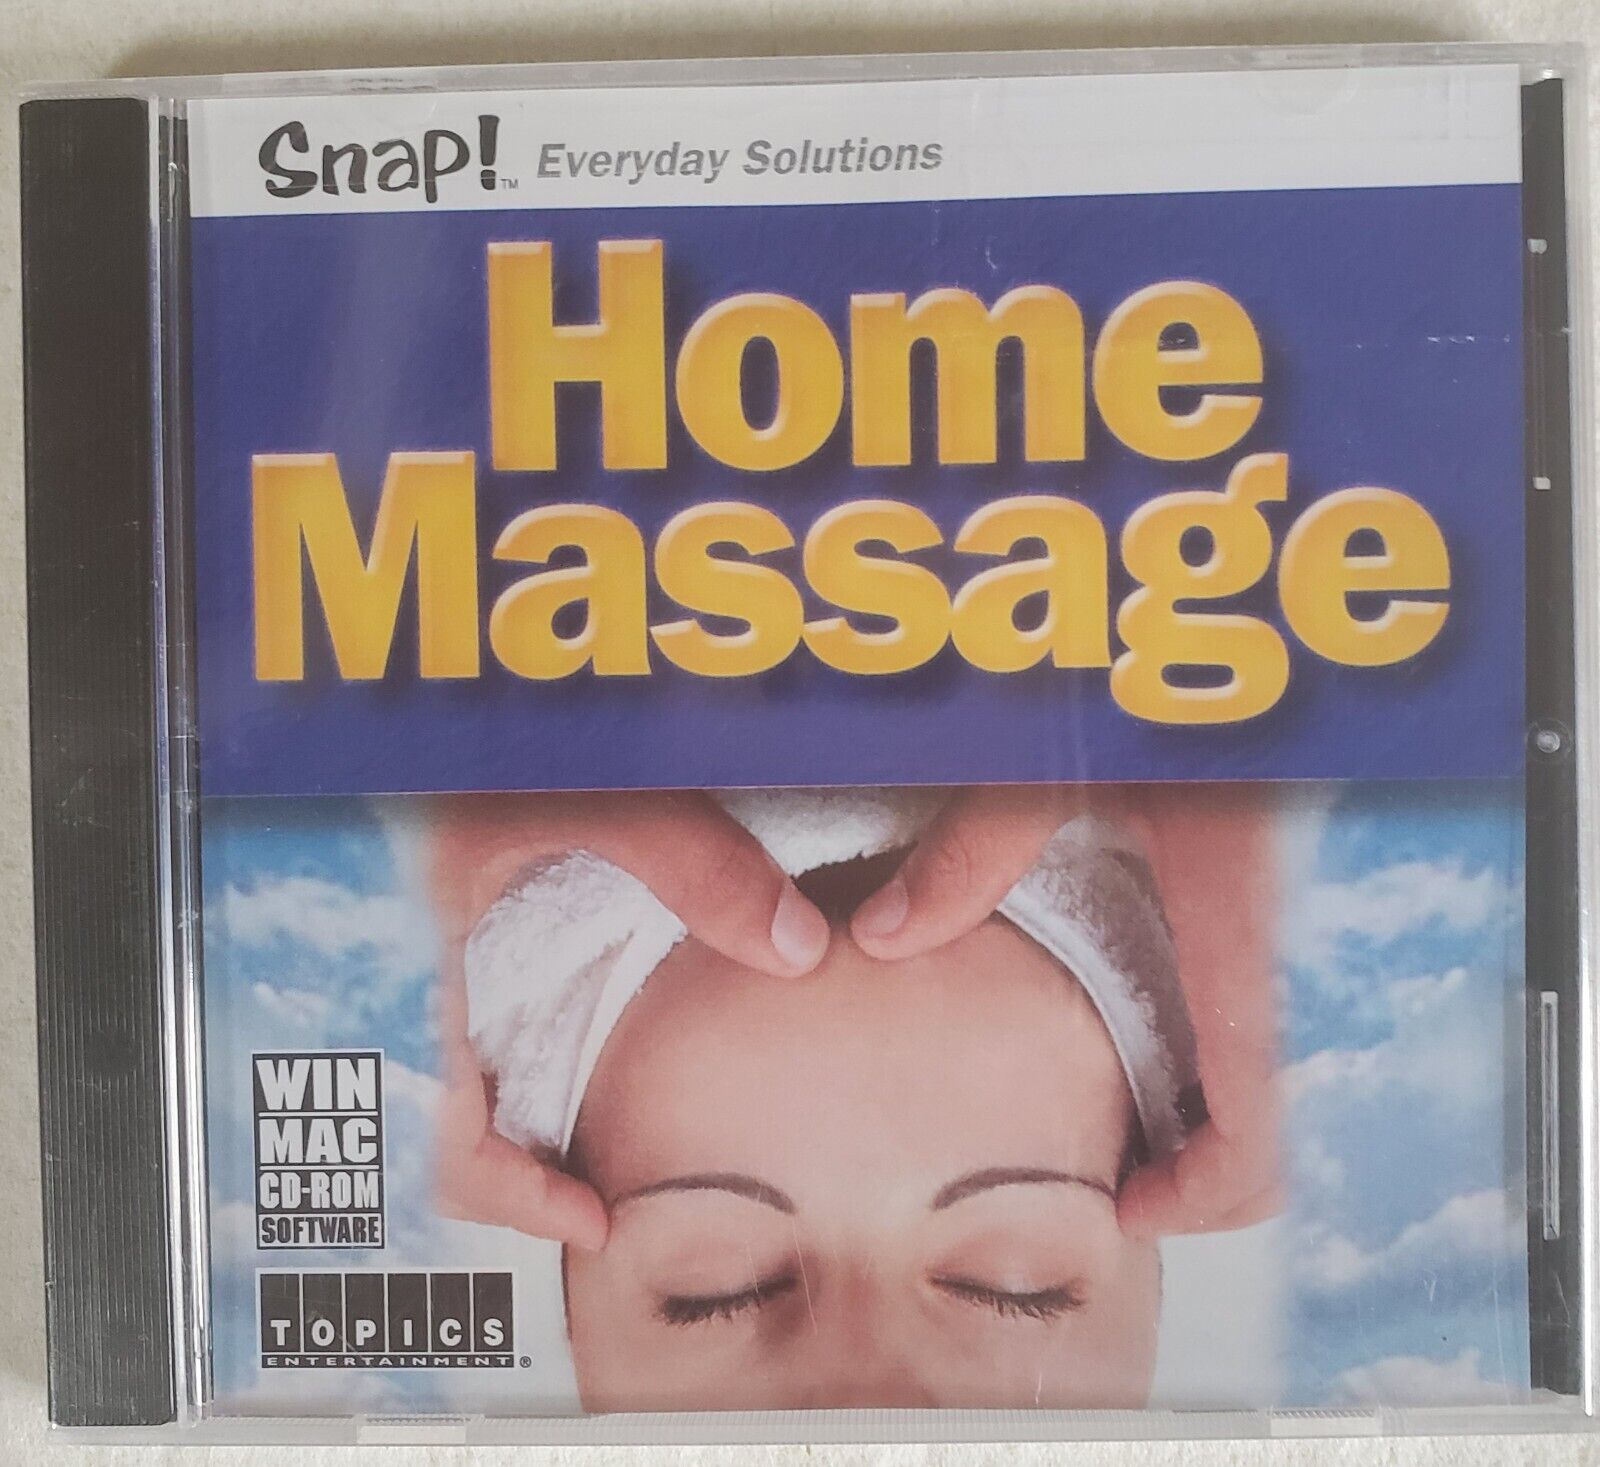 Snap Everyday Solutions: Home Massage (For PC/Mac, 2006) Brand New Sealed